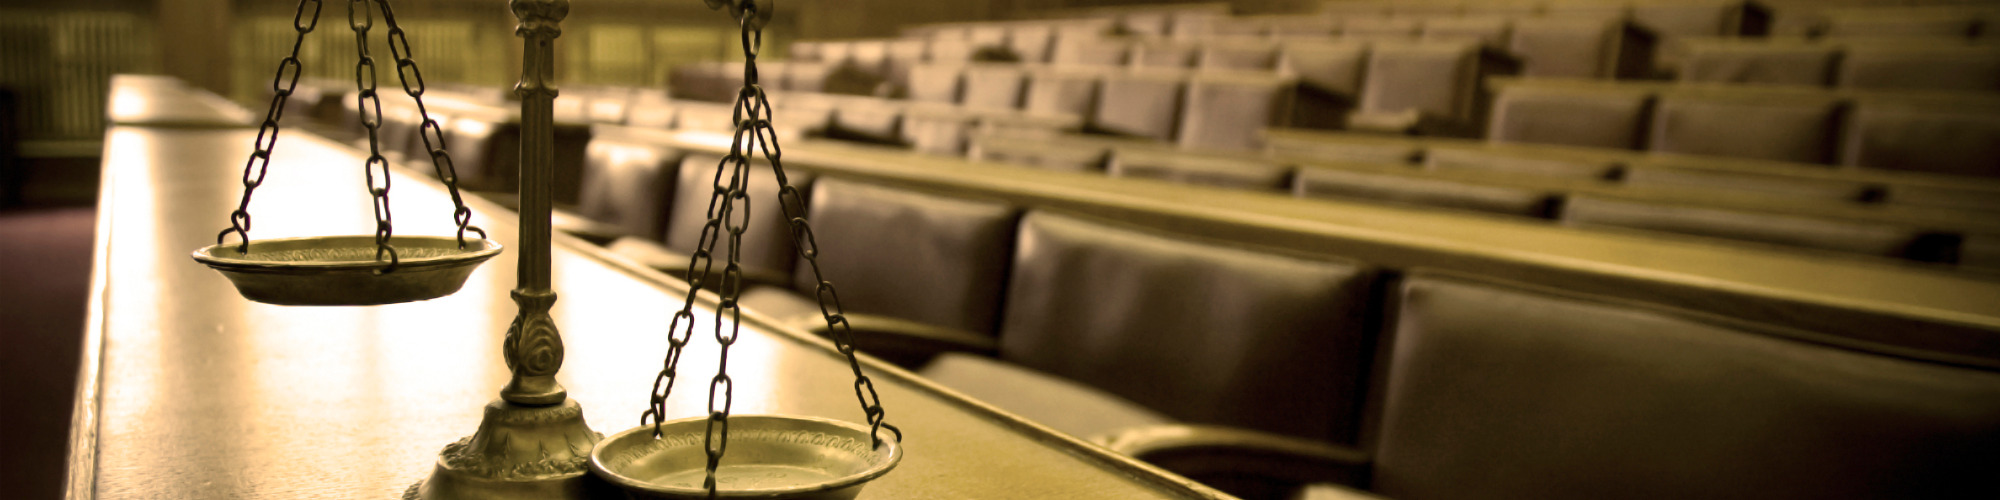 How to Prosecute & Defend in a Magistrates Court Trial.... & Deal With the Tricky Issues